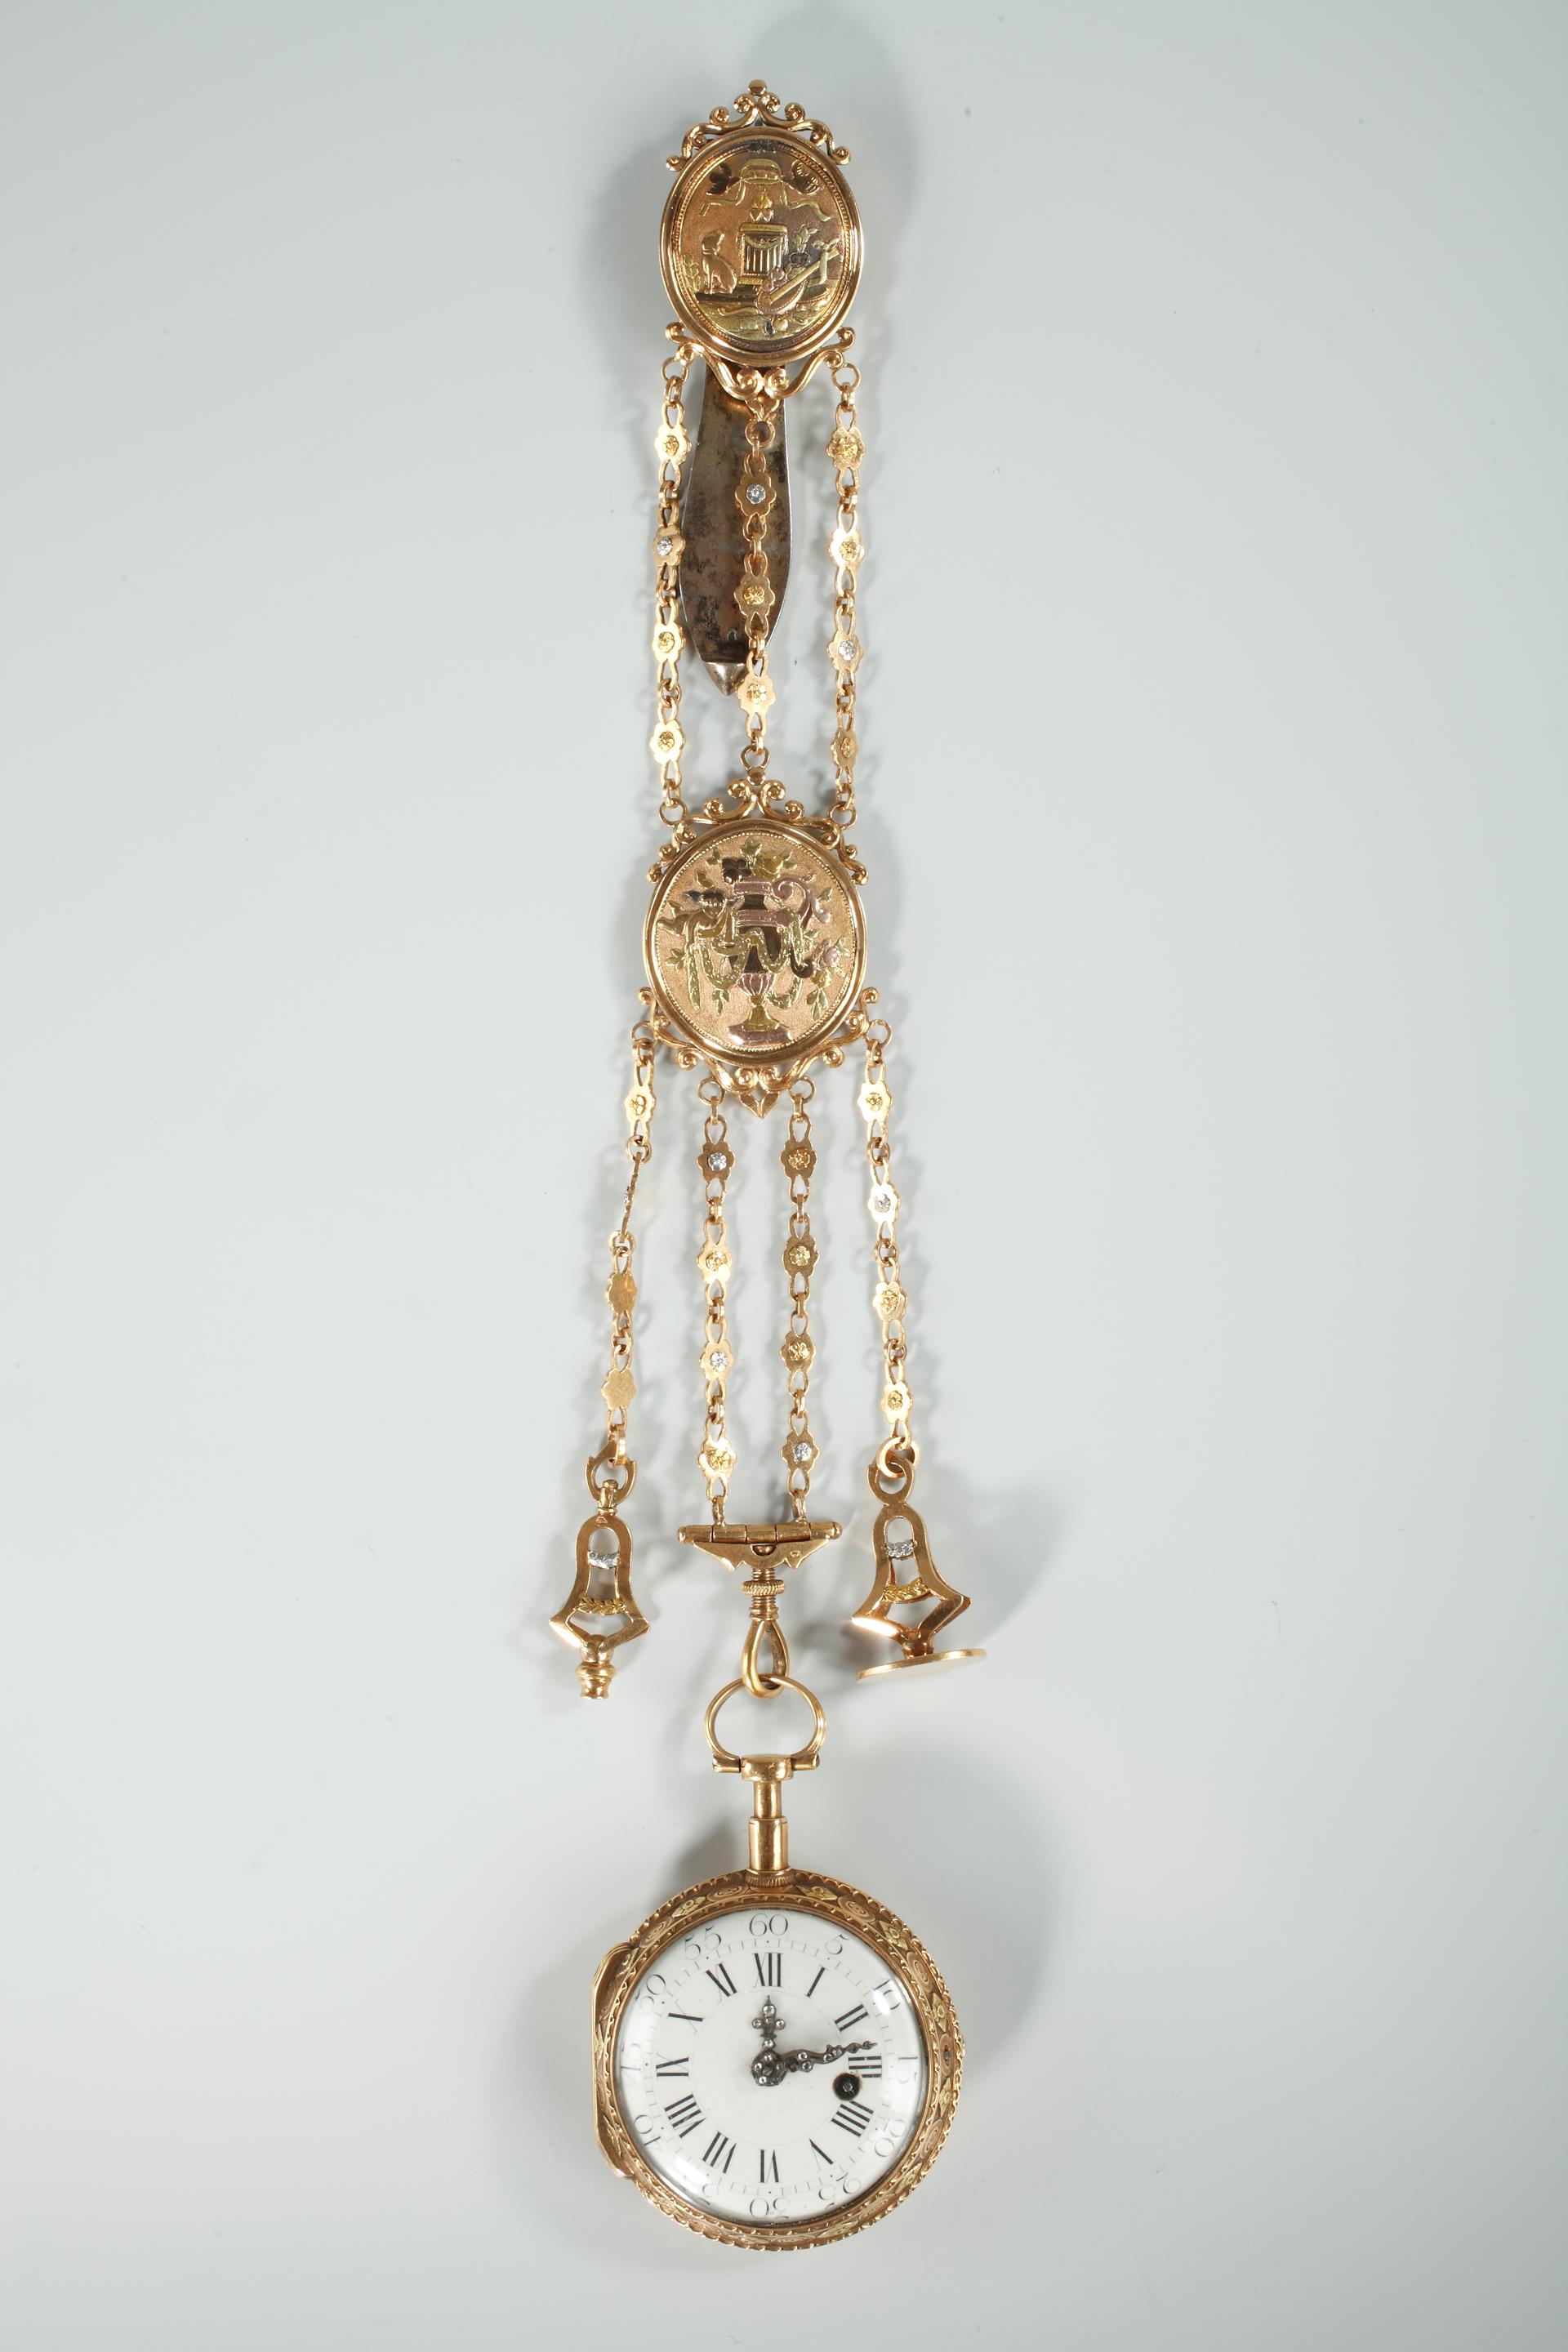 CHATELAINE AND GOLD WATCH.<br/>
18TH CENTURY FRENCH CRAFSTMANSHIP.<br/>